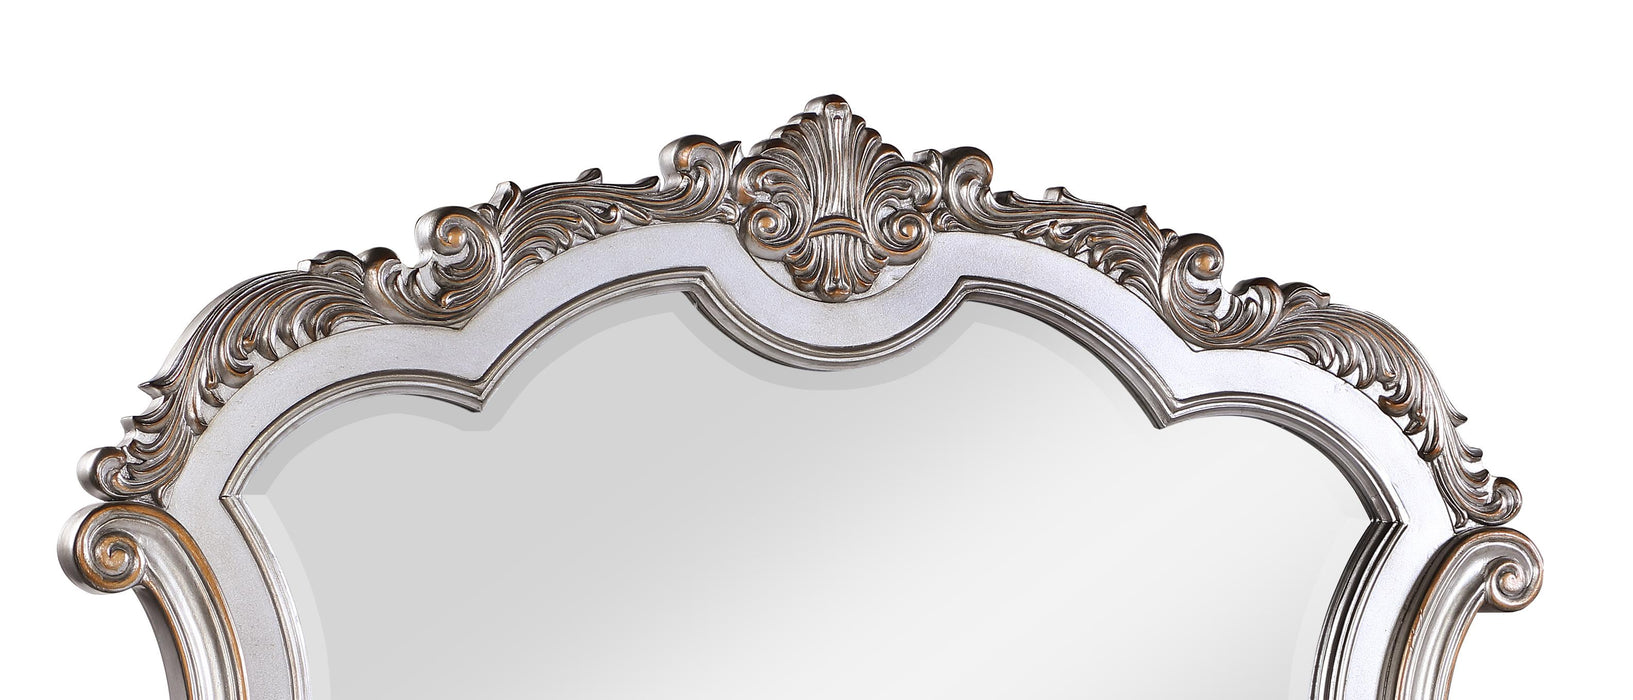 Melrose Transitional Style Mirror in Silver finish Wood